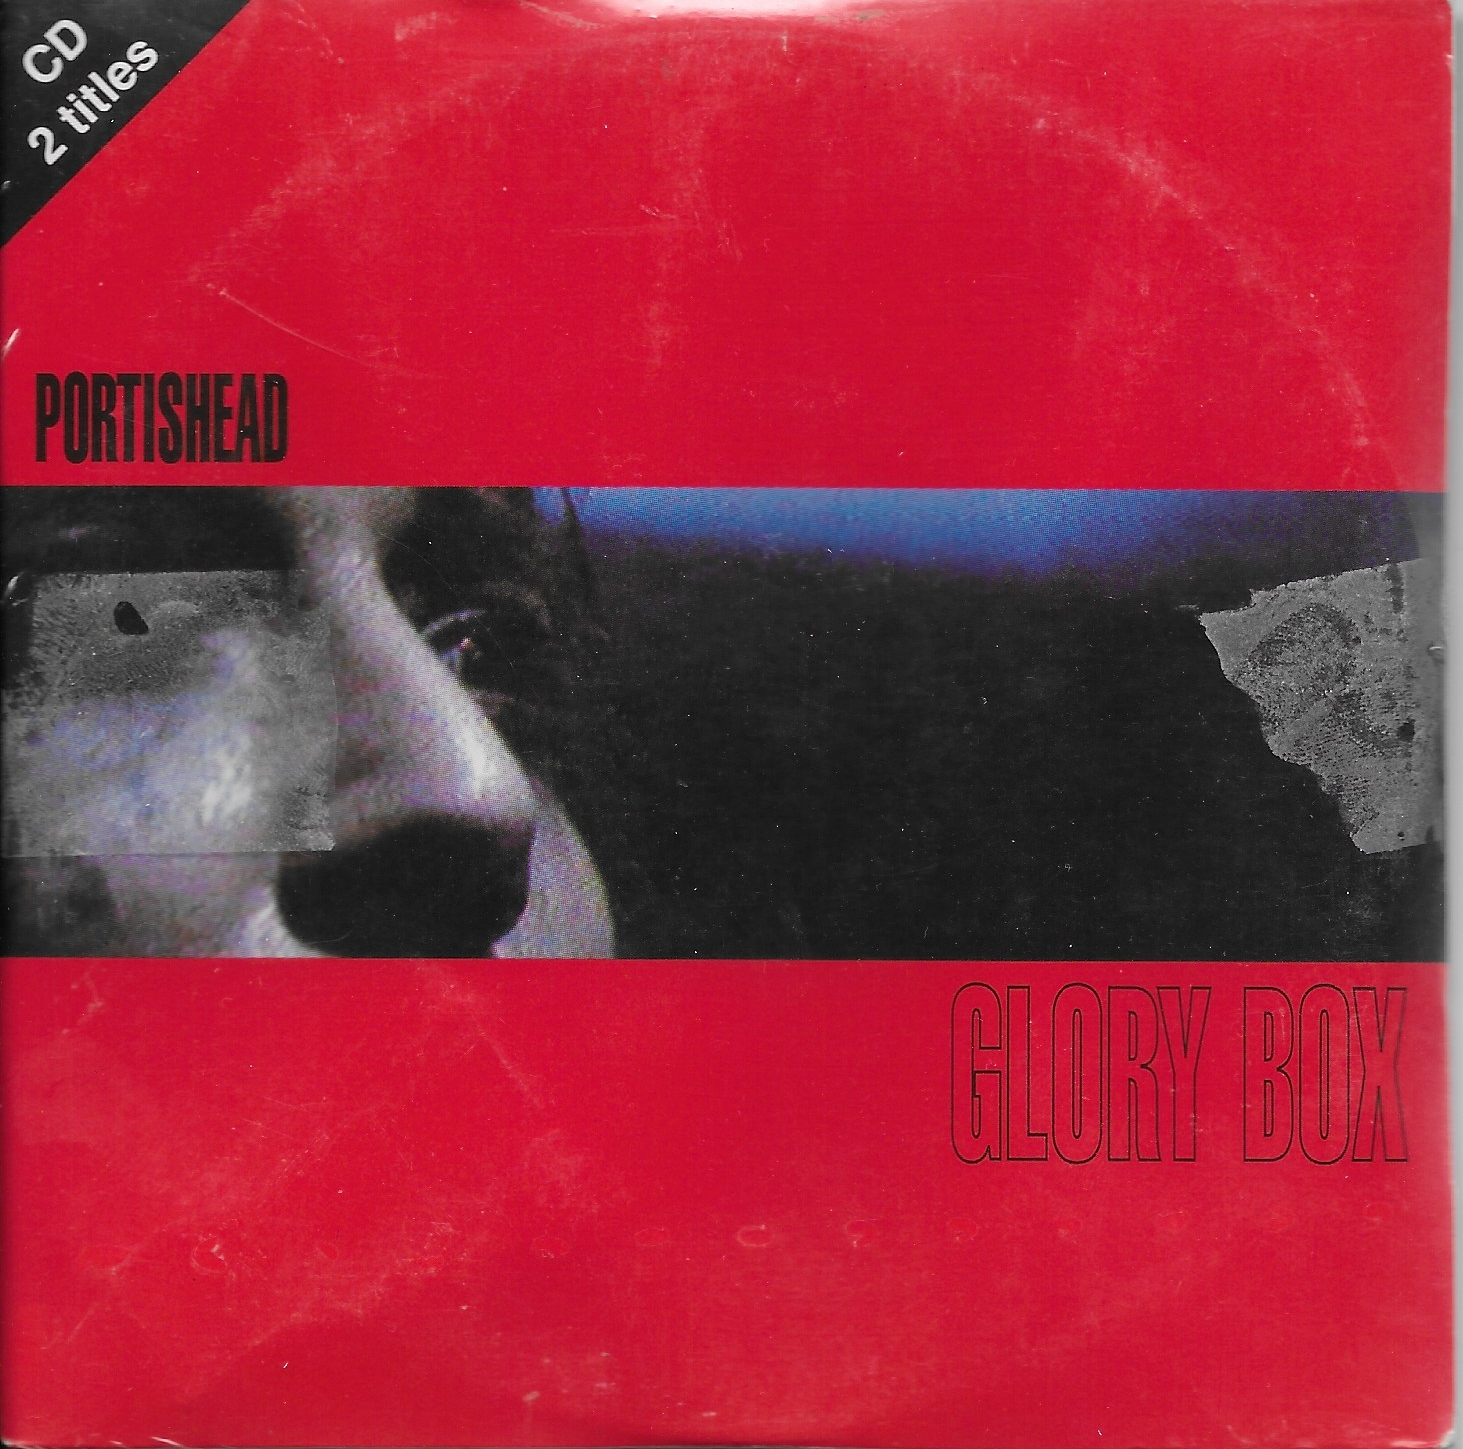 Picture of 857770 - 2 Glory box - French import (Sealed) by artist Portishead 